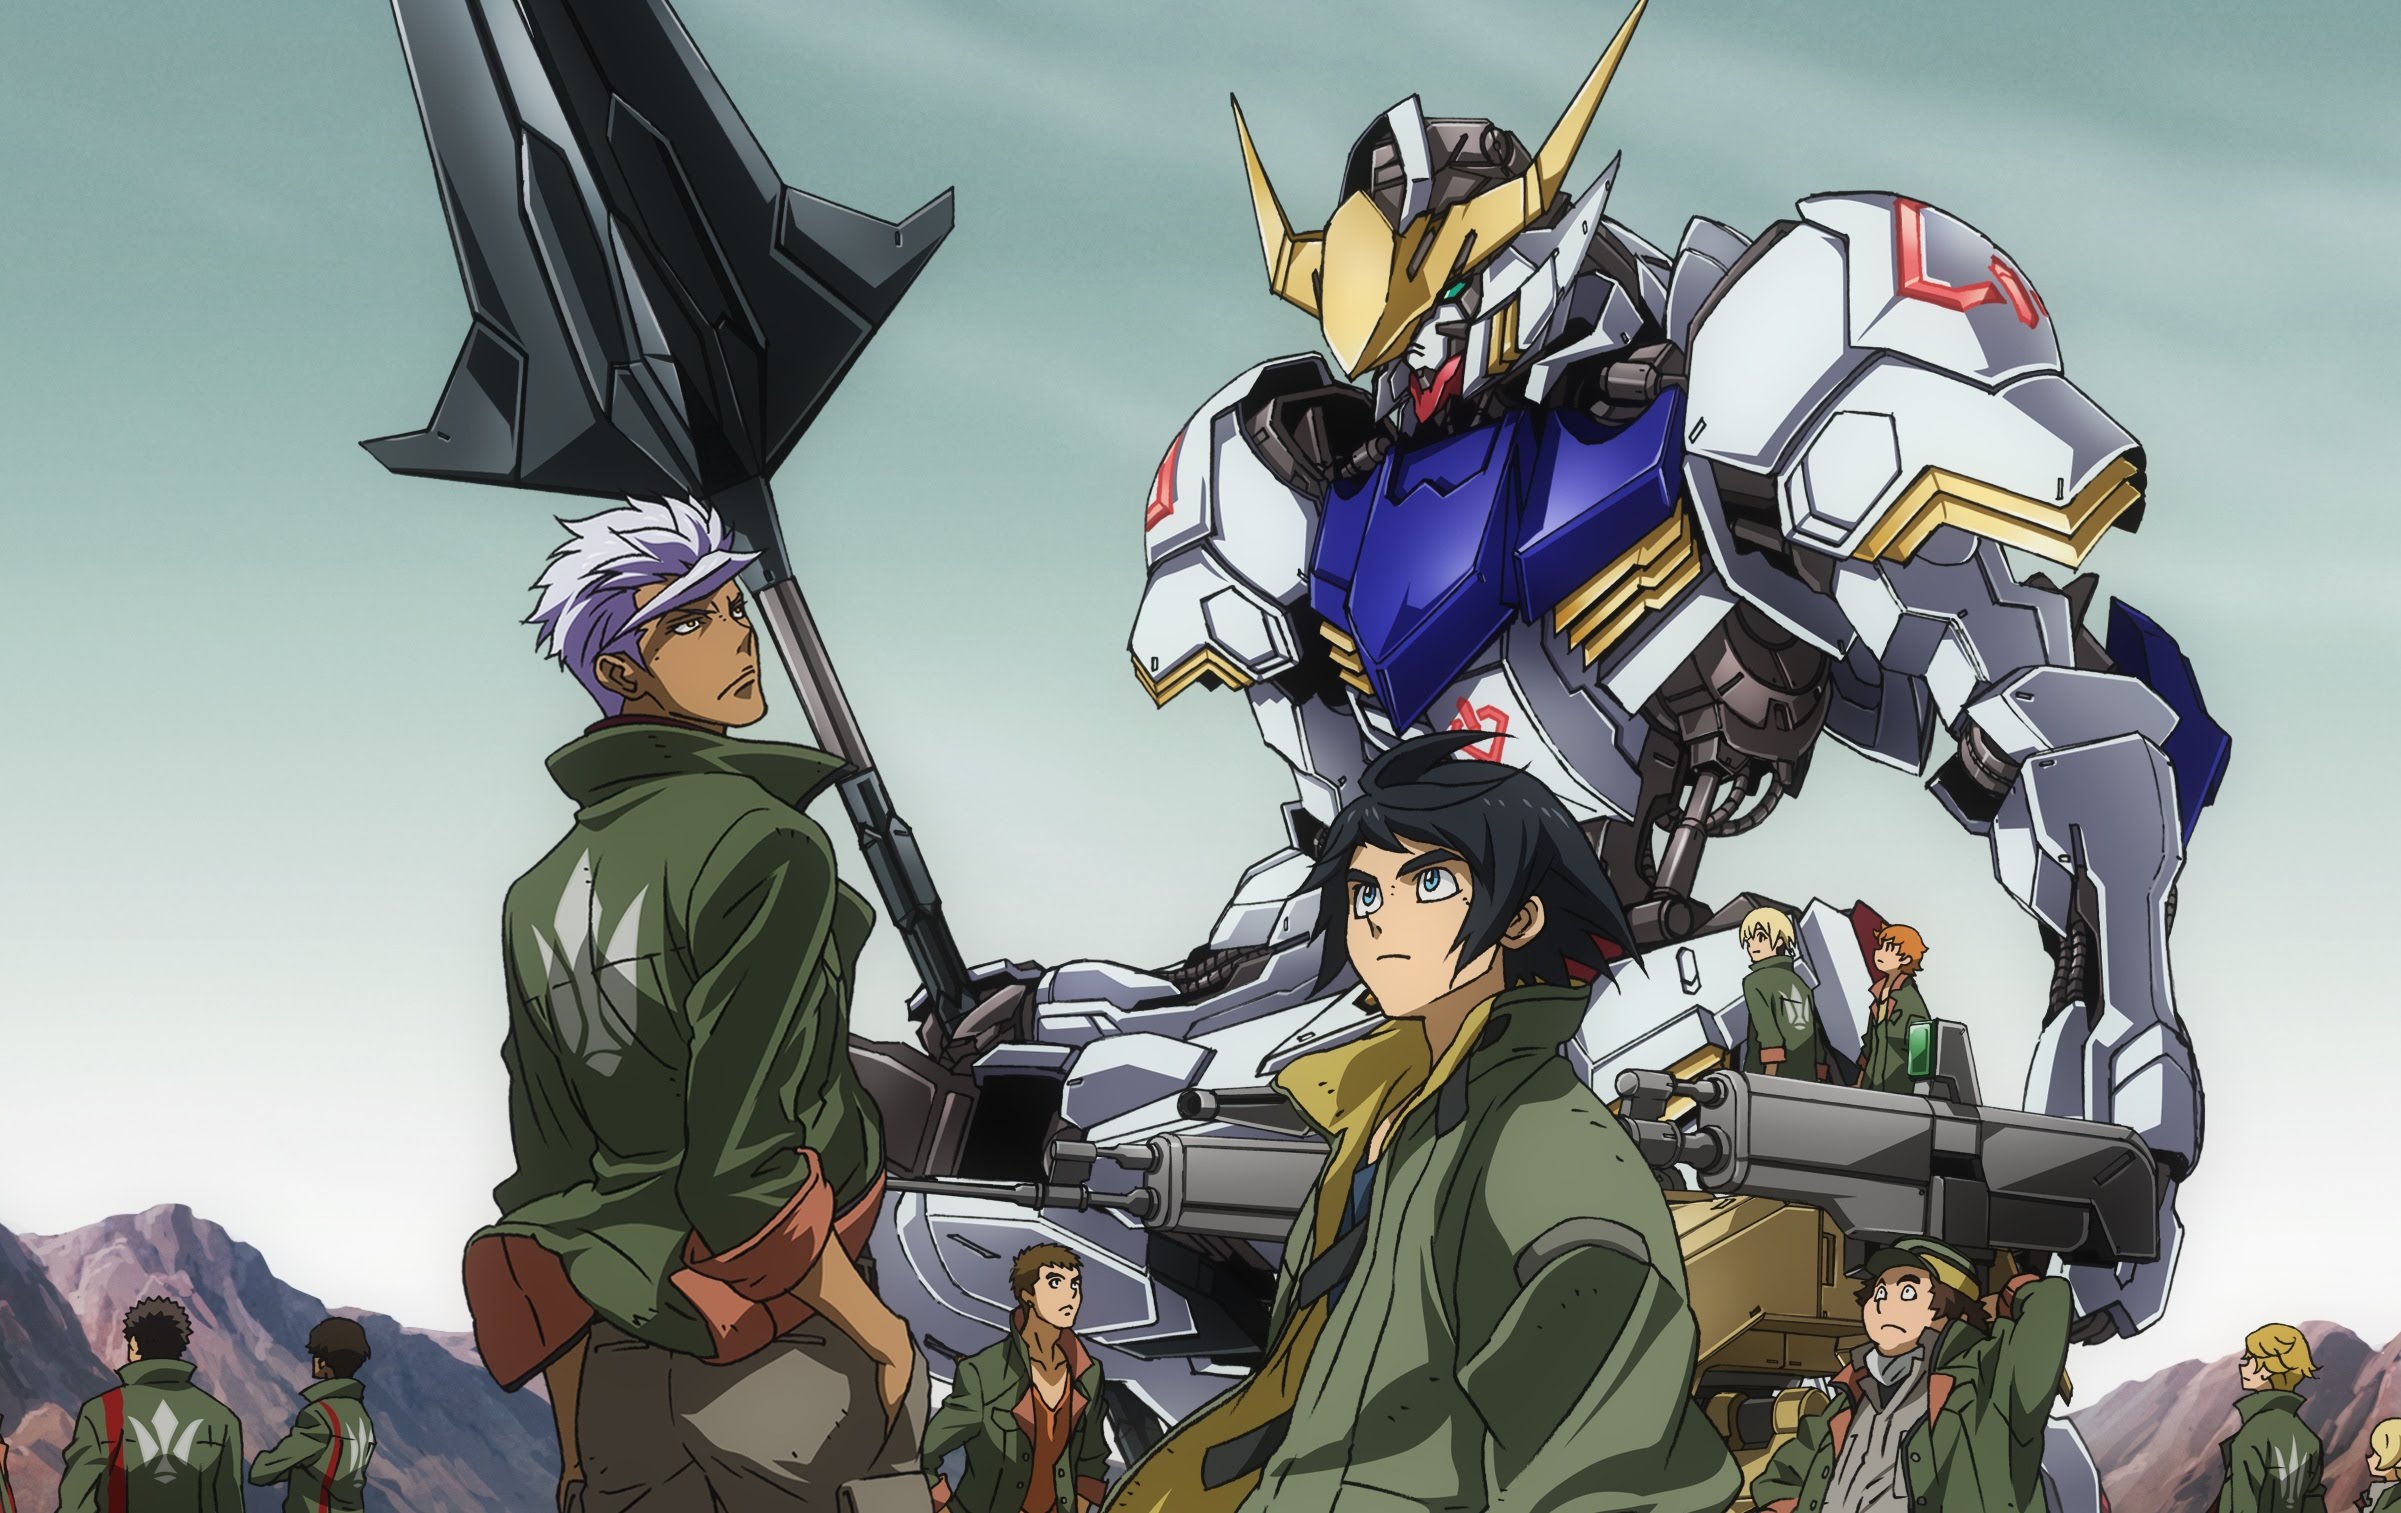 Mobile Suit Gundam Iron Blooded Orphans